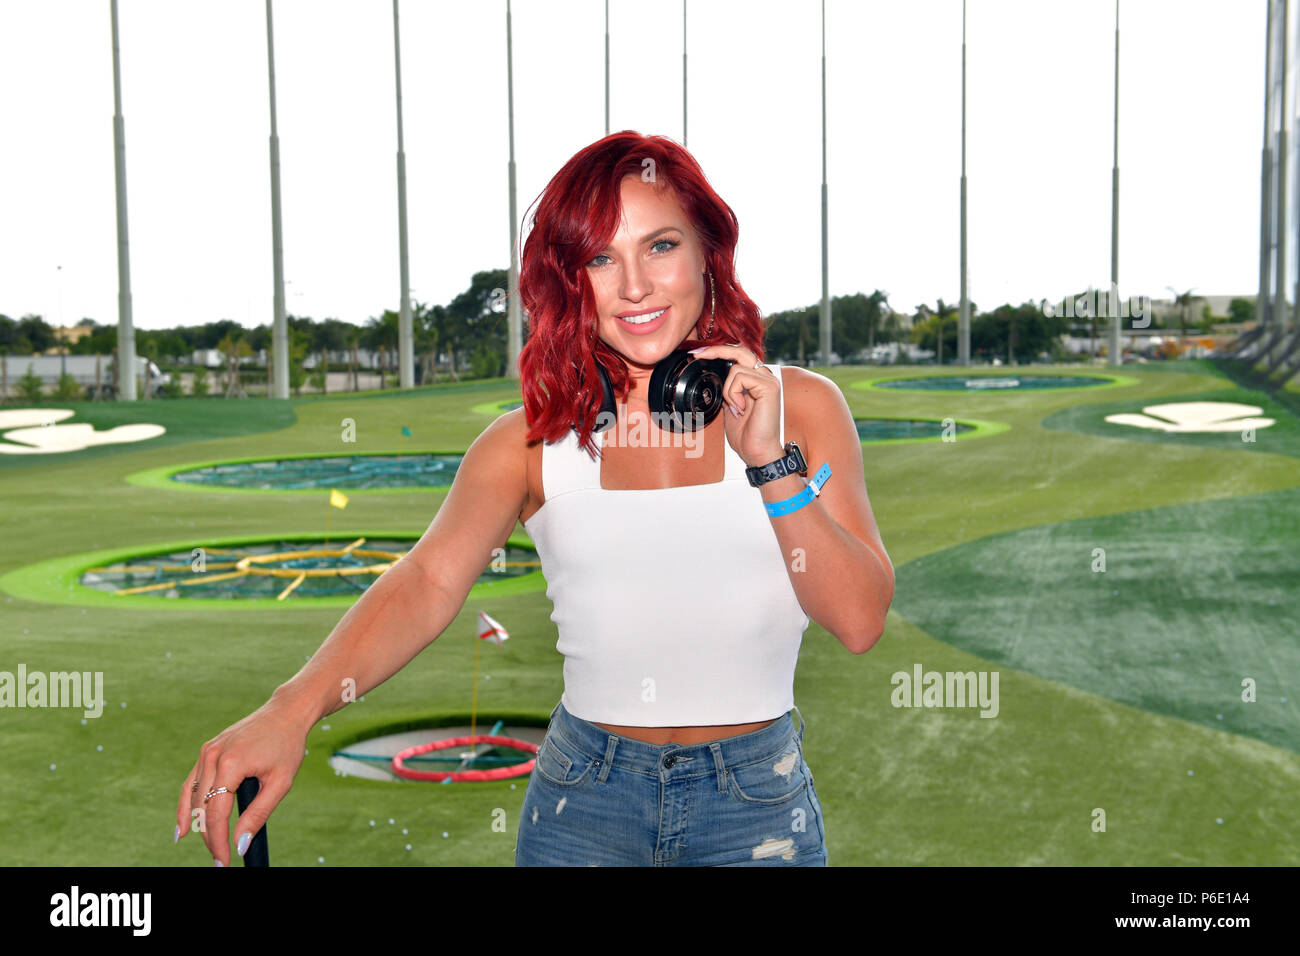 Miami Gardens, FL, USA. 30th June, 2018. Sharna May Burgess at the Topgolf during Dj Irie Weekend 2018 on June 30, 2018 in Miami, Florida People: Sharna May Burgess   Credit: Hoo Me.Com/Media Punch/Alamy Live News Stock Photo